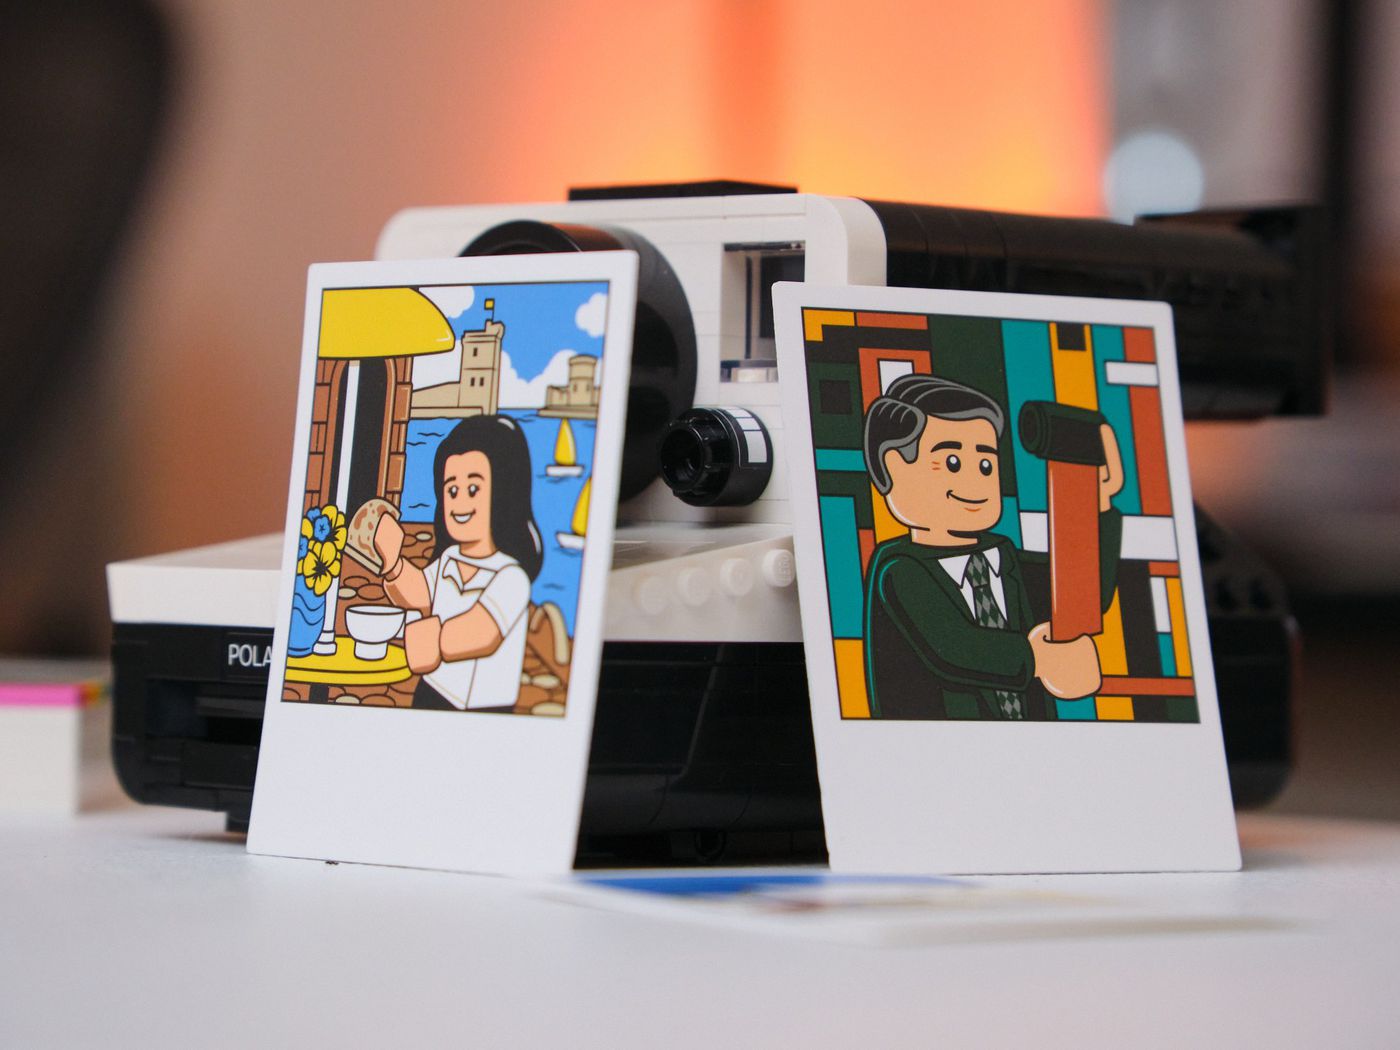 The final prototype photocards in real life, sitting against the Lego camera.